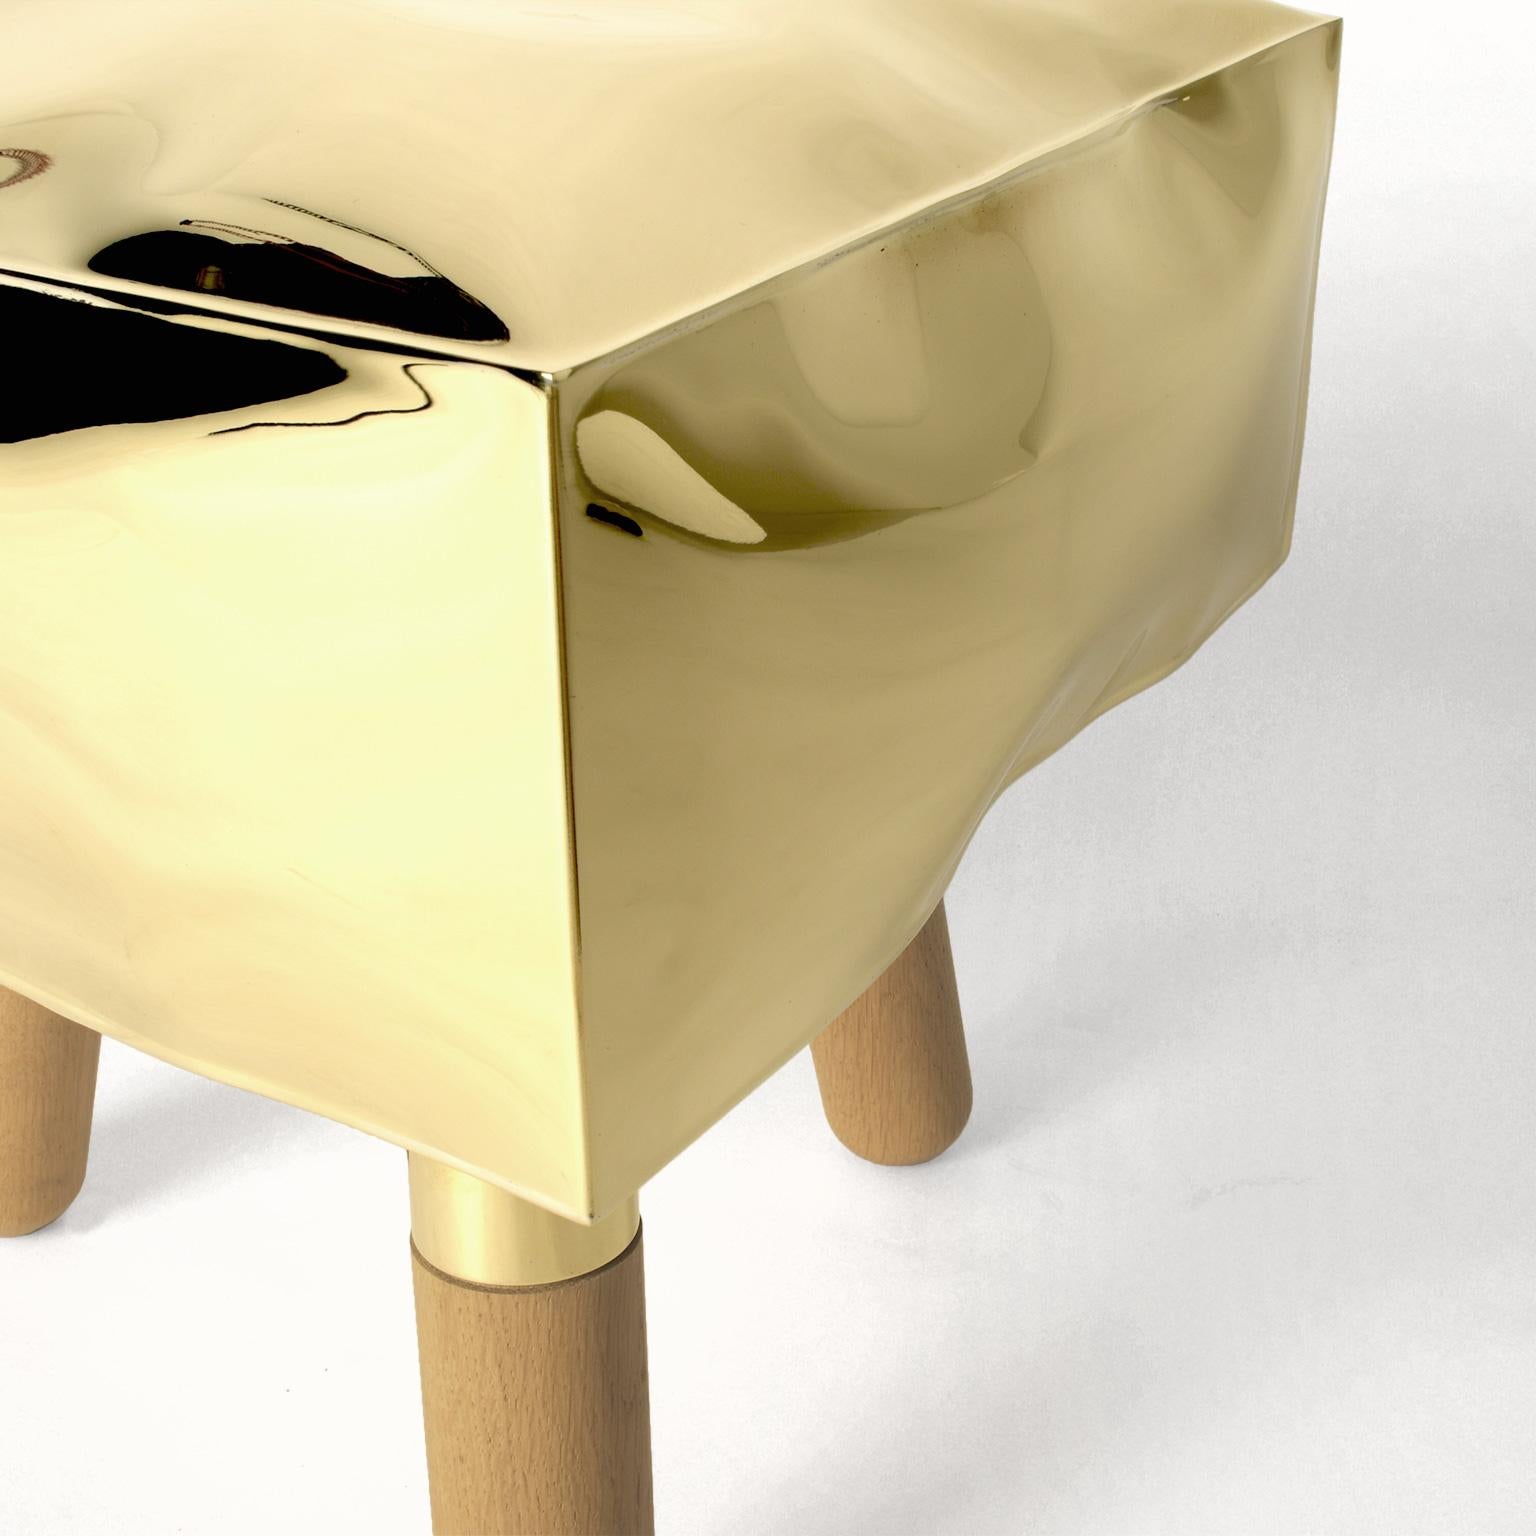 Contemporary Limited Edition Wood Brass Stool, Icenine V1 by Edizione Limitata 3